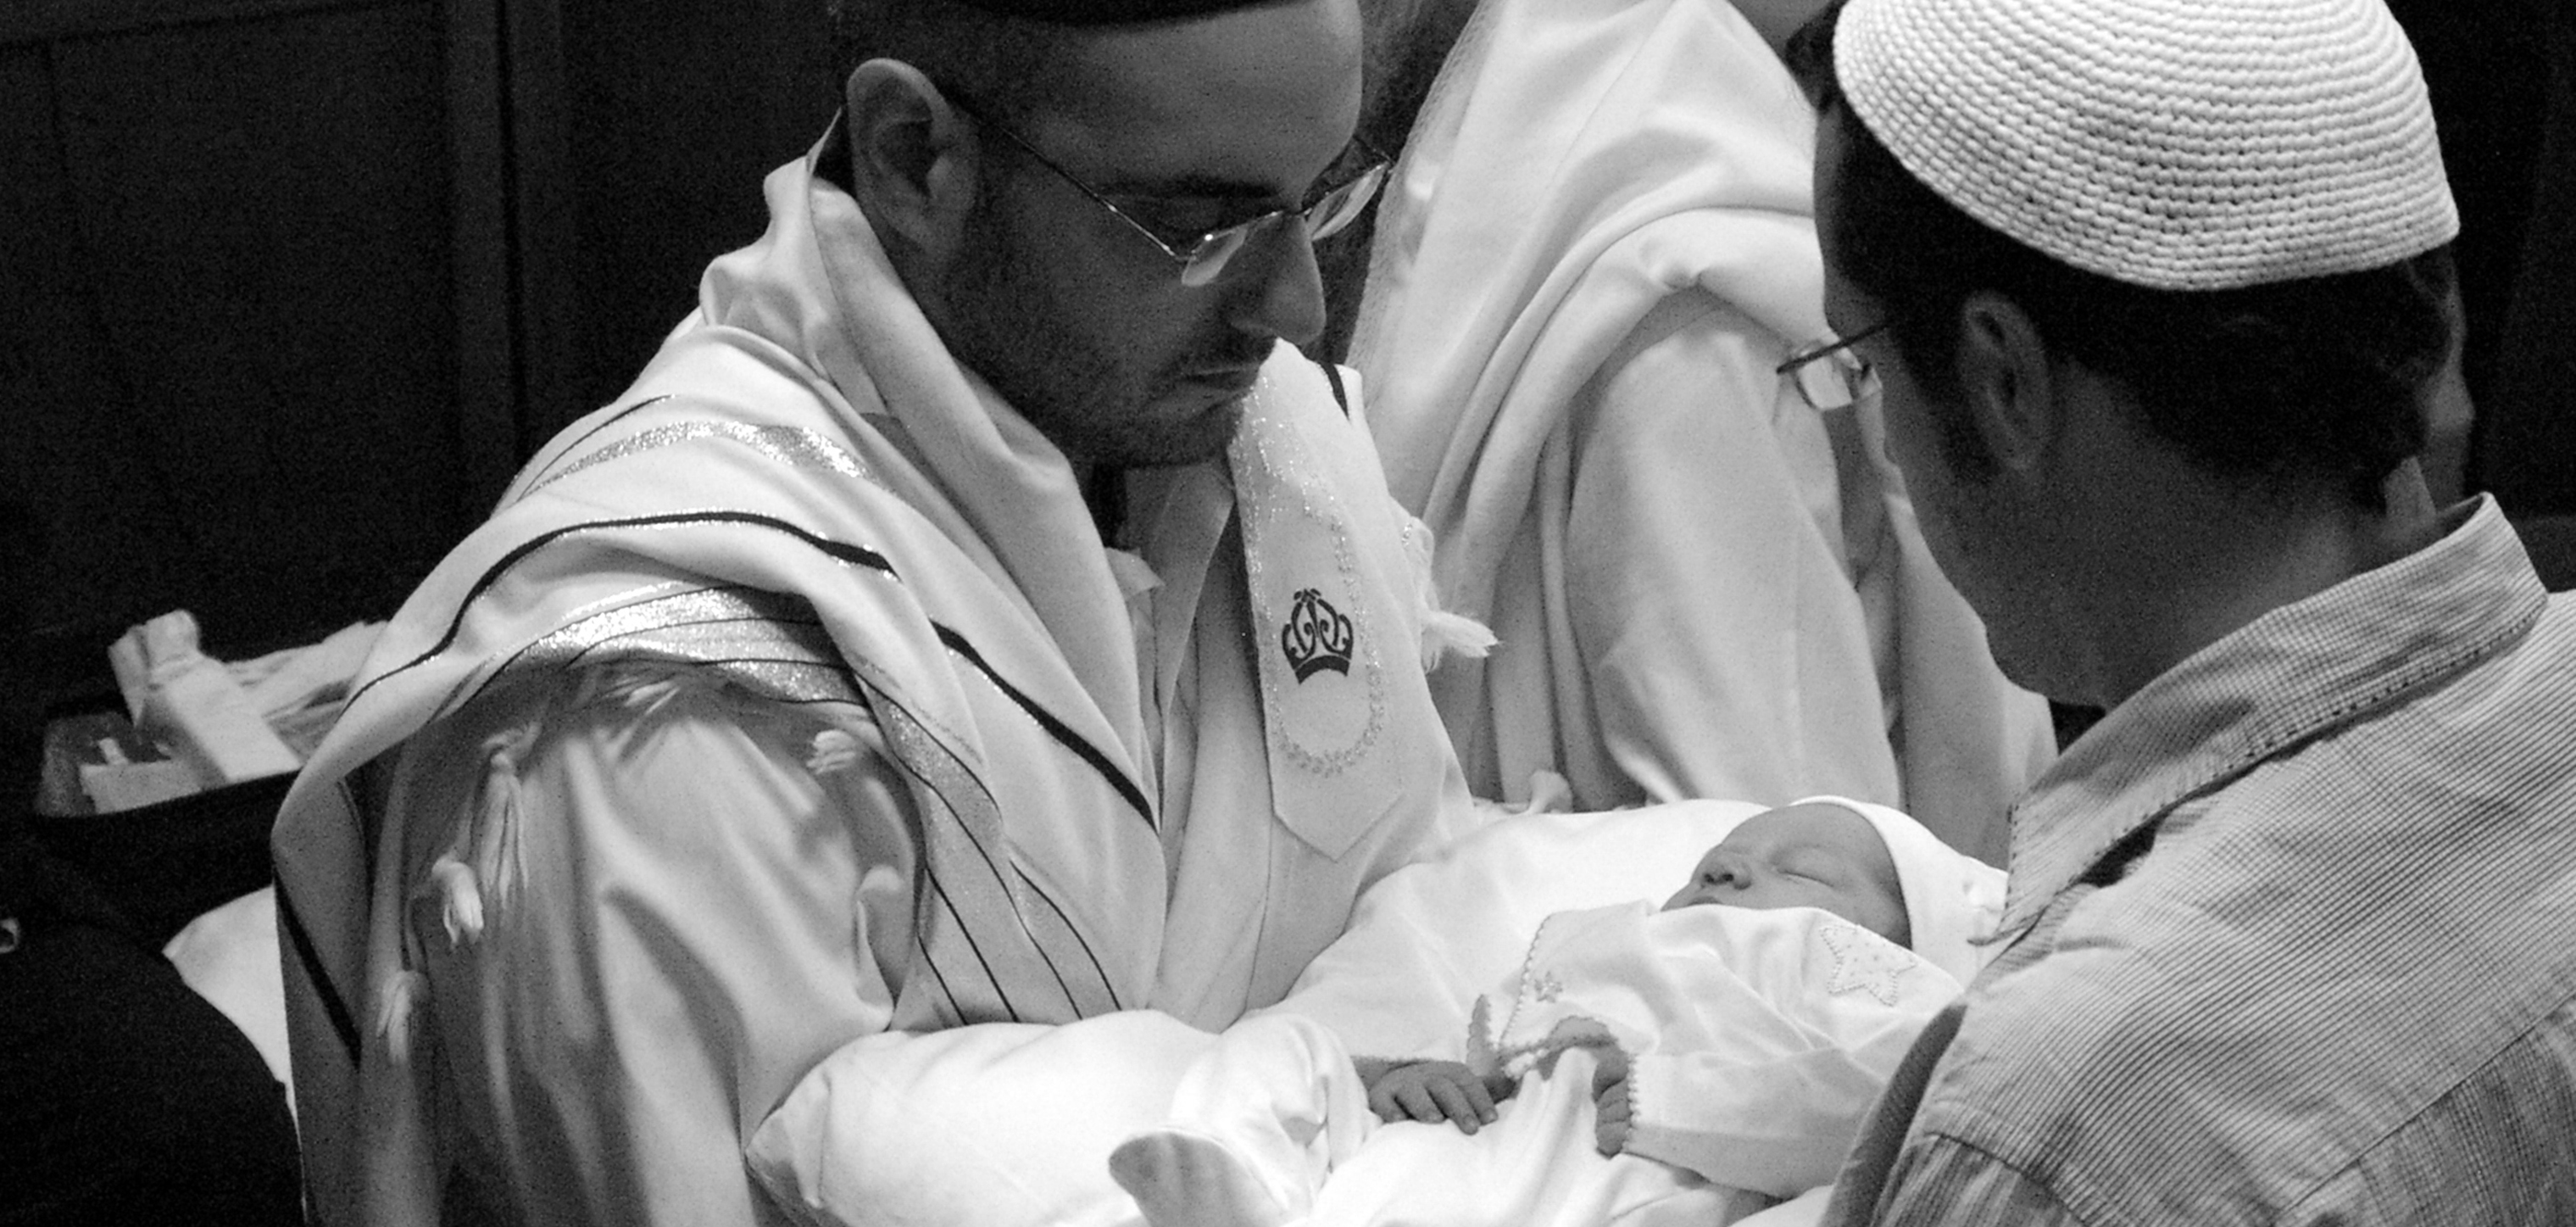 An infant is prepared for his brit milah by rabbis in a British synagogue. Photo by Yosef Silver used under Creative Commons Licence.